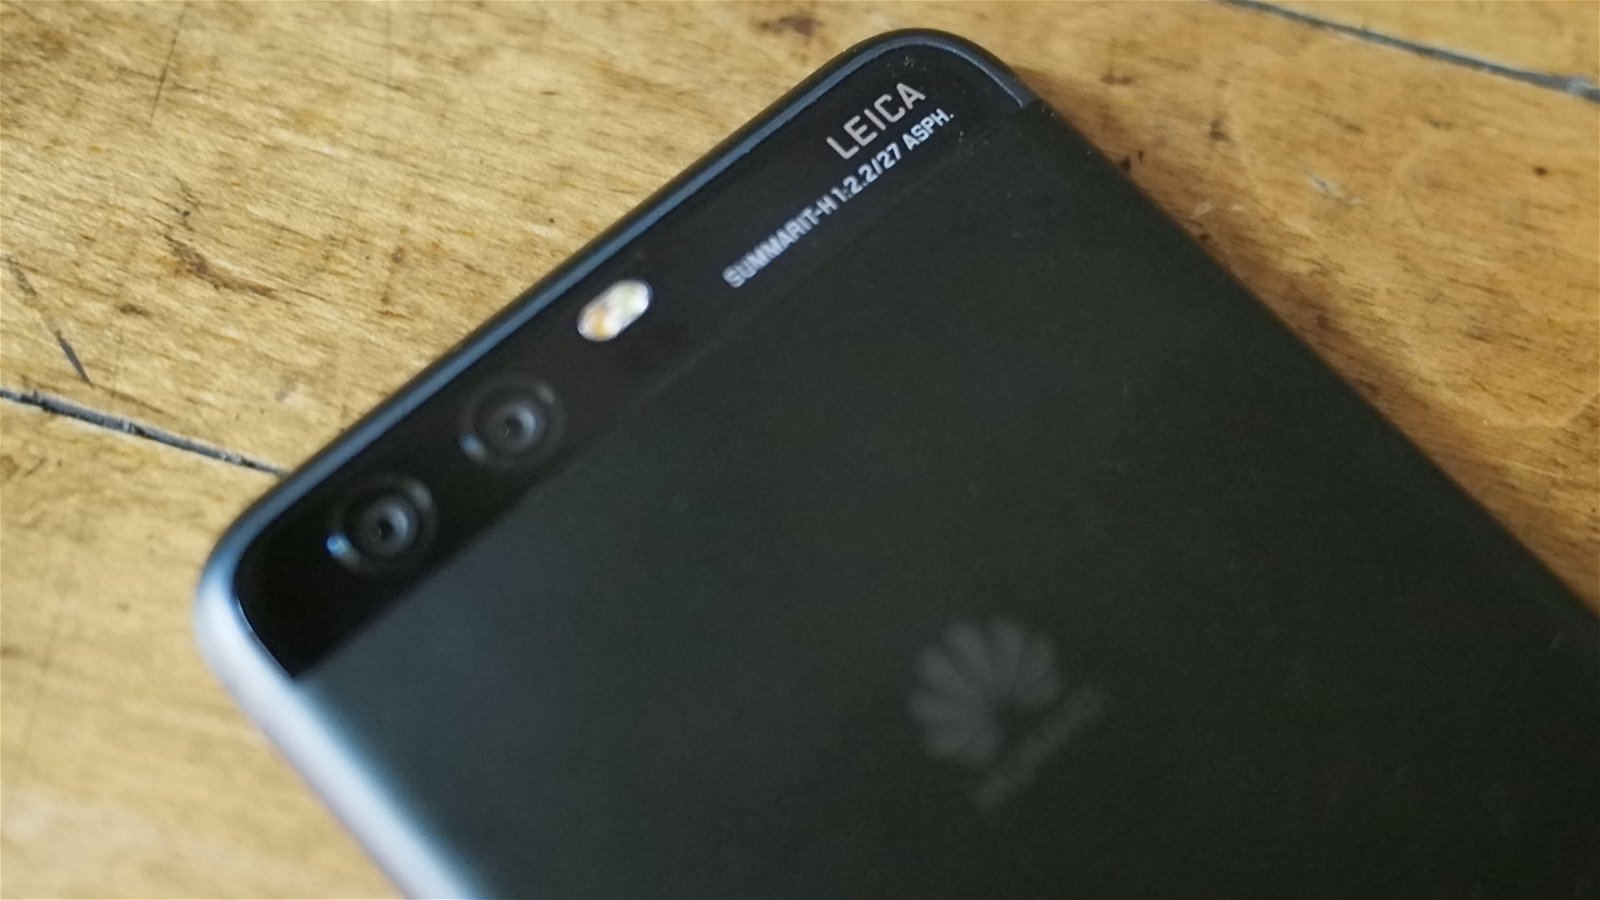 Huawei P10 Review - A Solid Android Experience 4